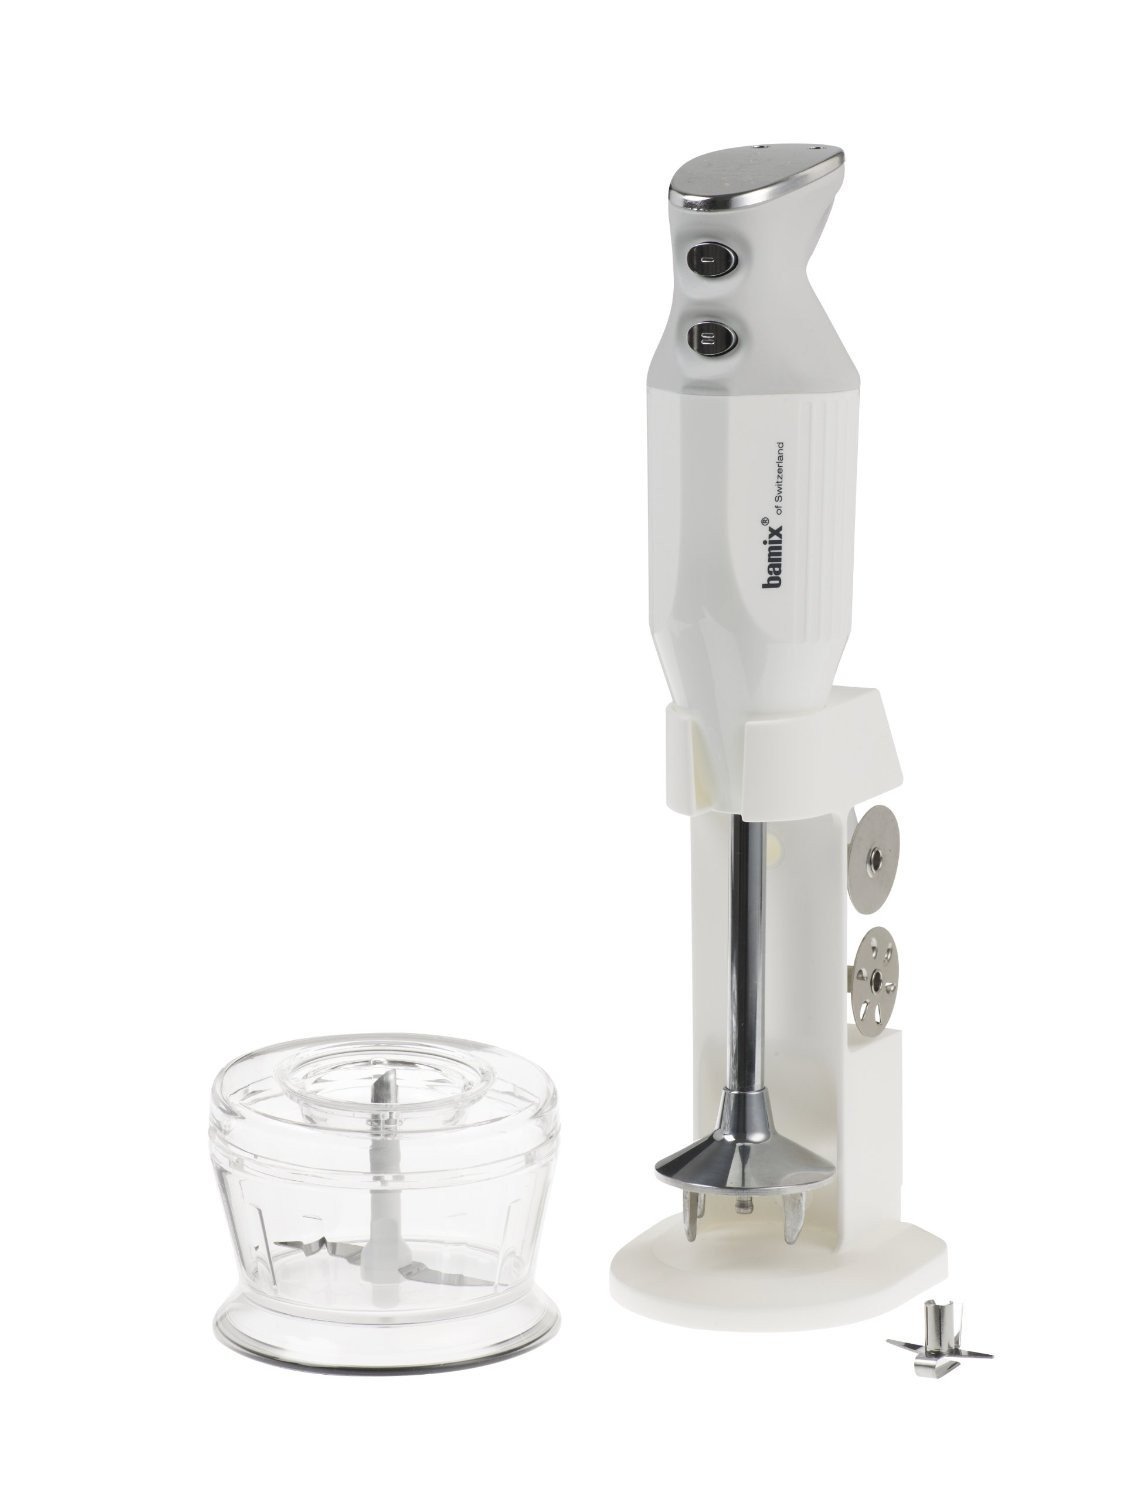 Bamix Deluxe M150 Immersion Hand with Dry Grinder and Table Stand - White